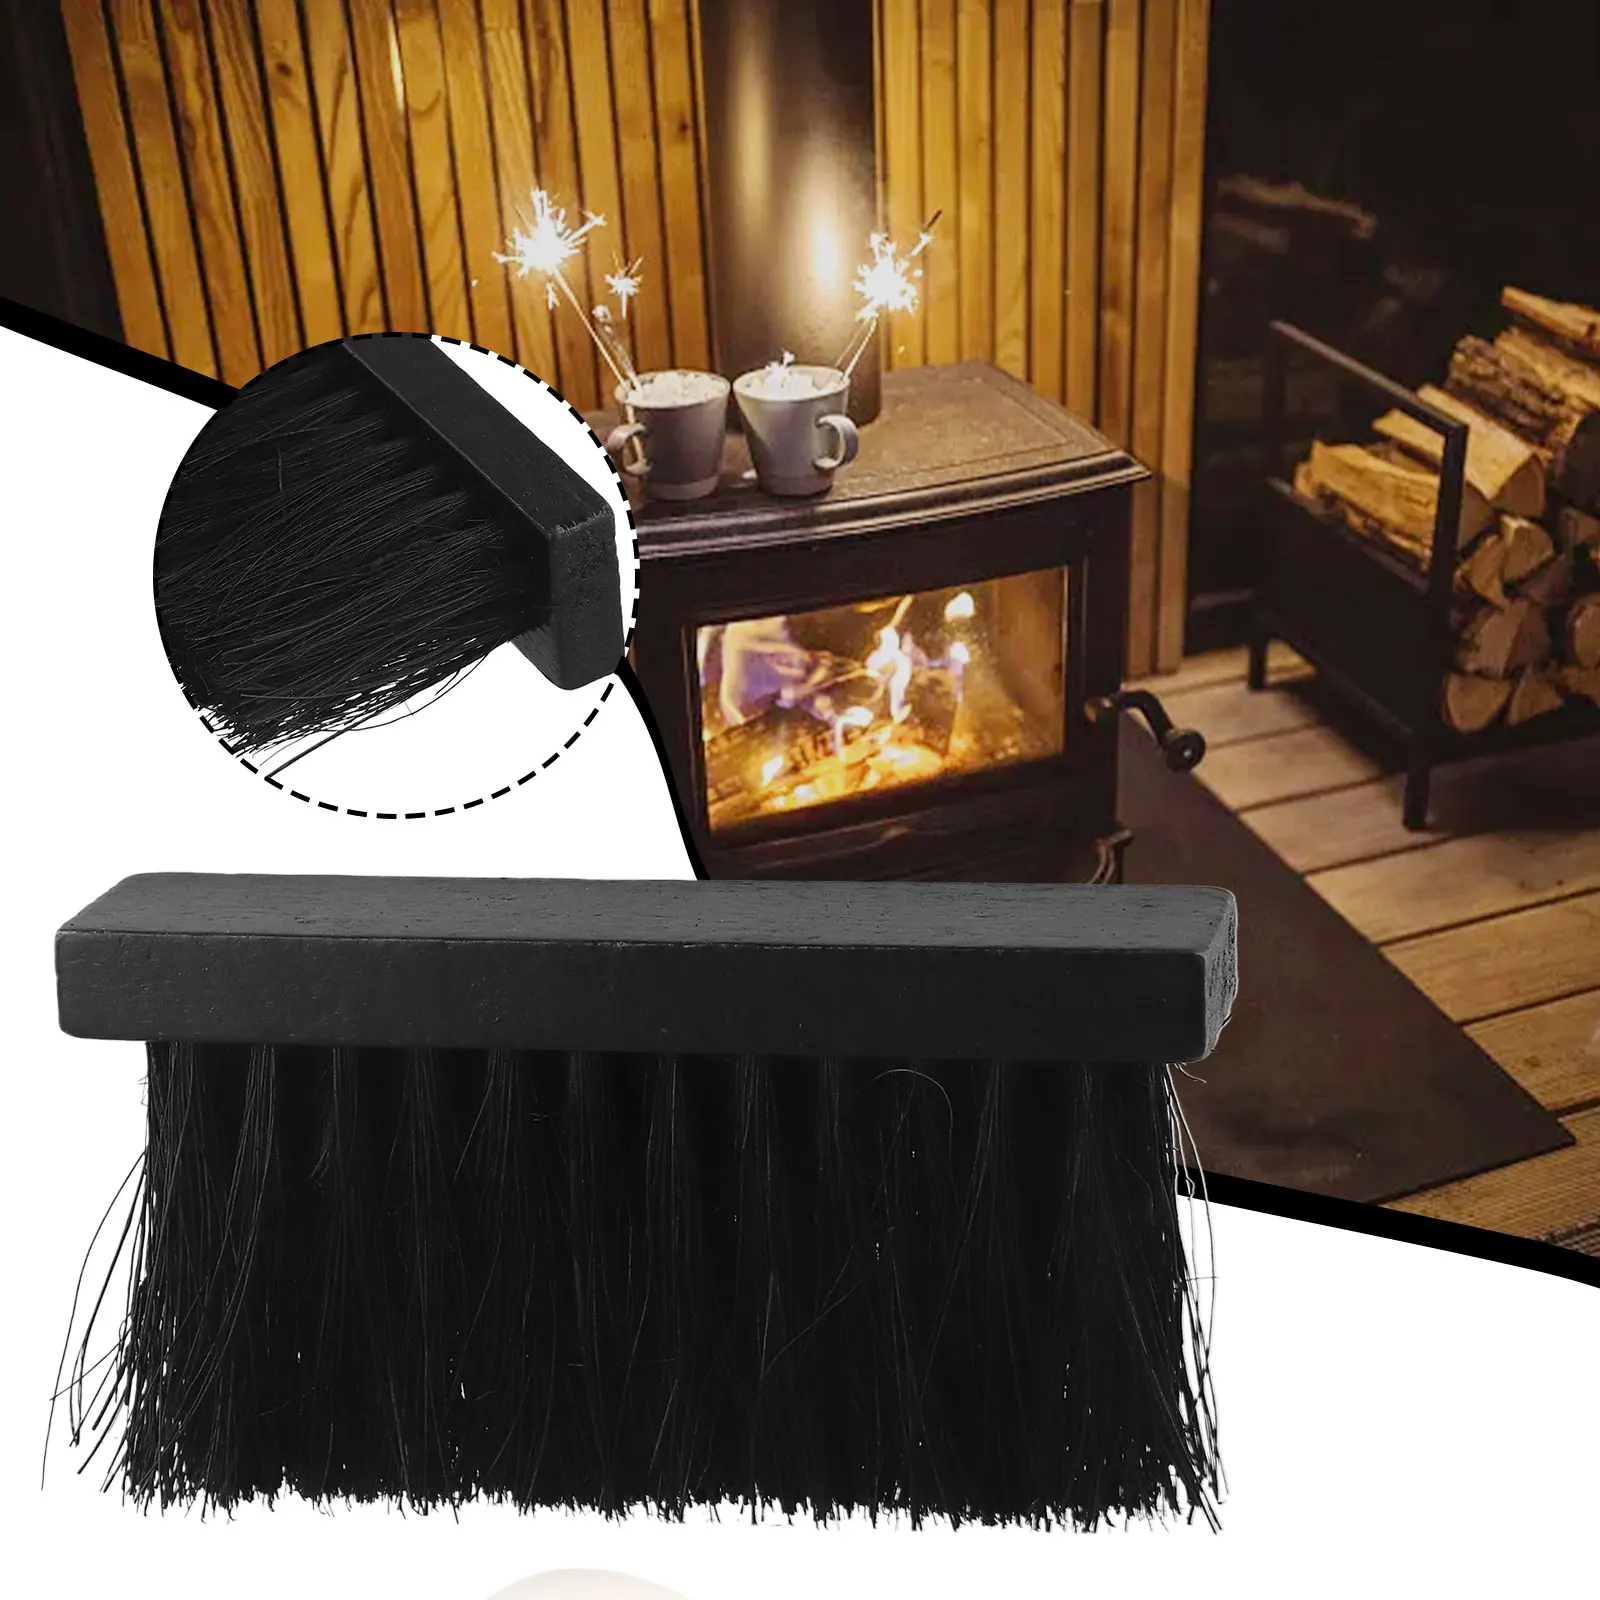 

High Quality Fireplace Brush Cleaning Brushes 1Pcs Brush Head Fire Hearth Fireplace Fireside Refill Cleaning Home